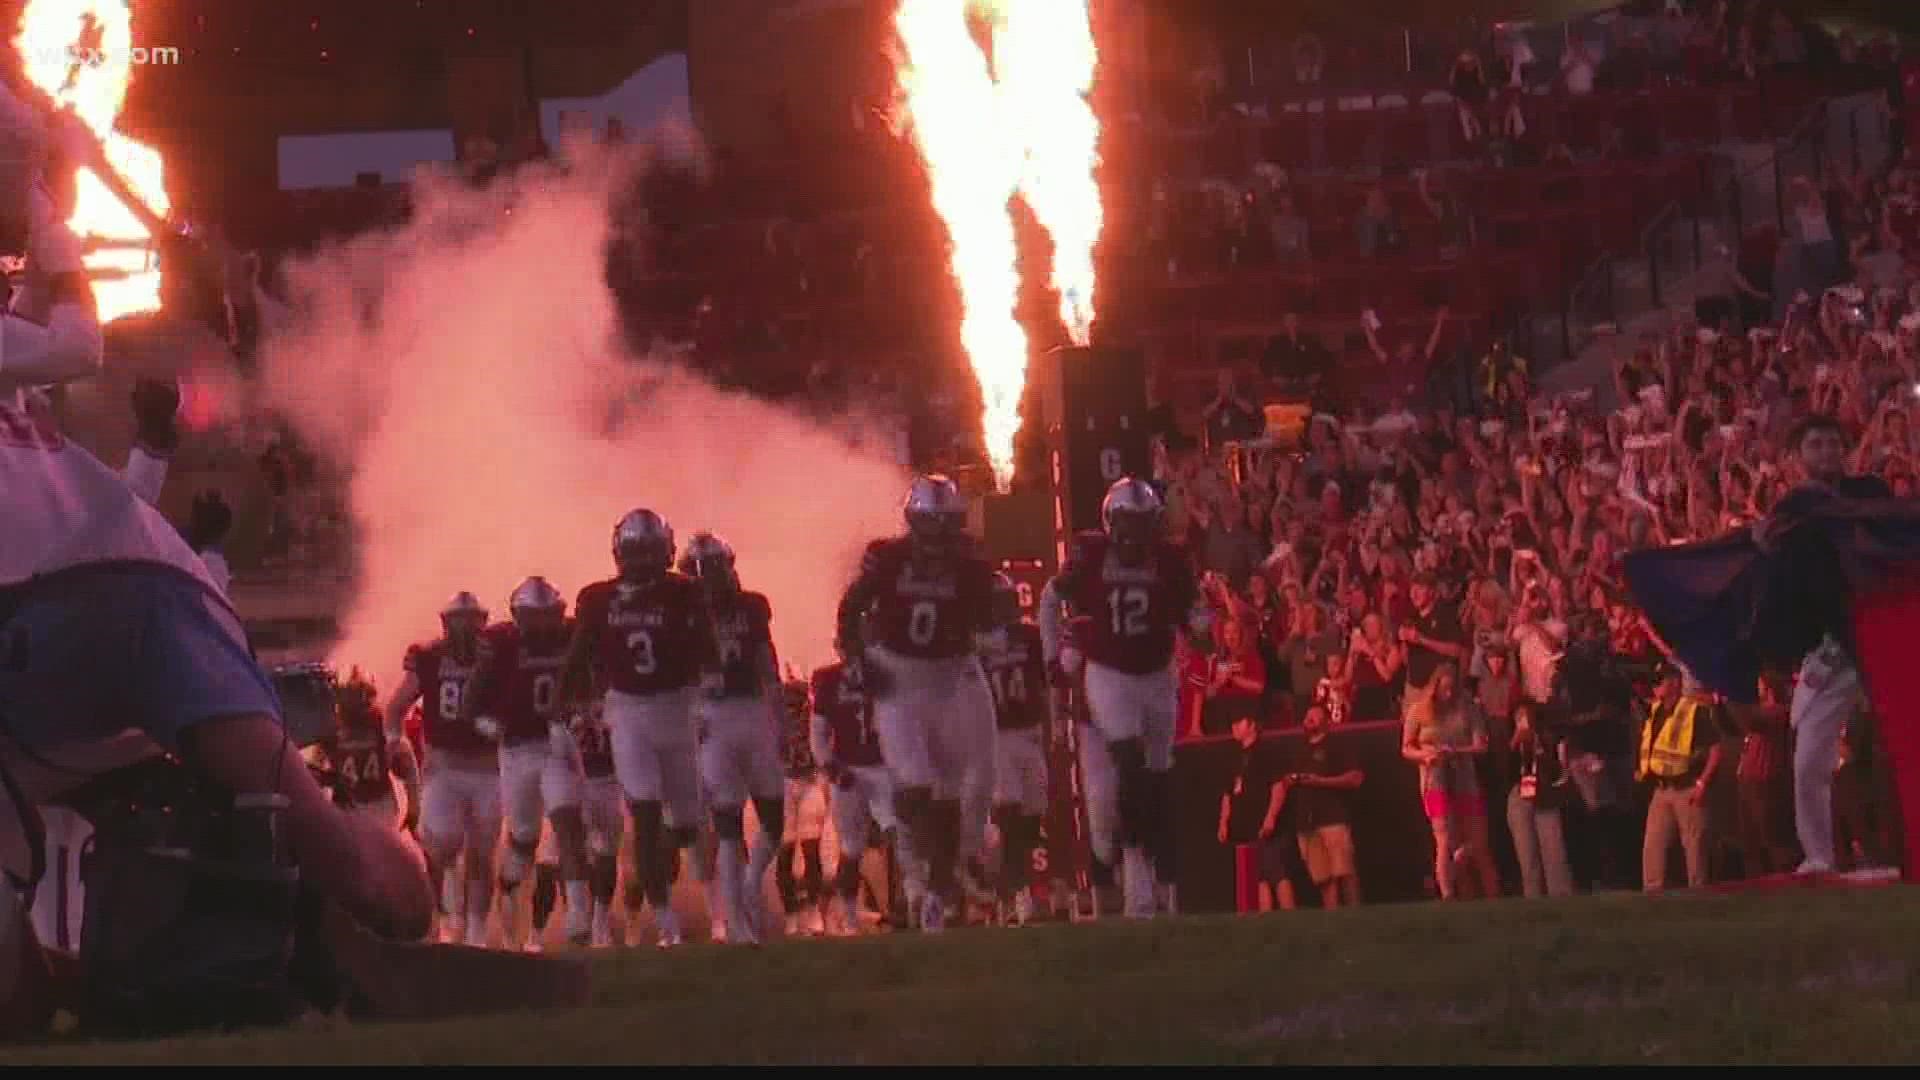 The University of South Carolina Athletics Office said Tuesday the game against SC State will now be played Thursday evening at 7 p.m. at Williams-Brice Stadium.